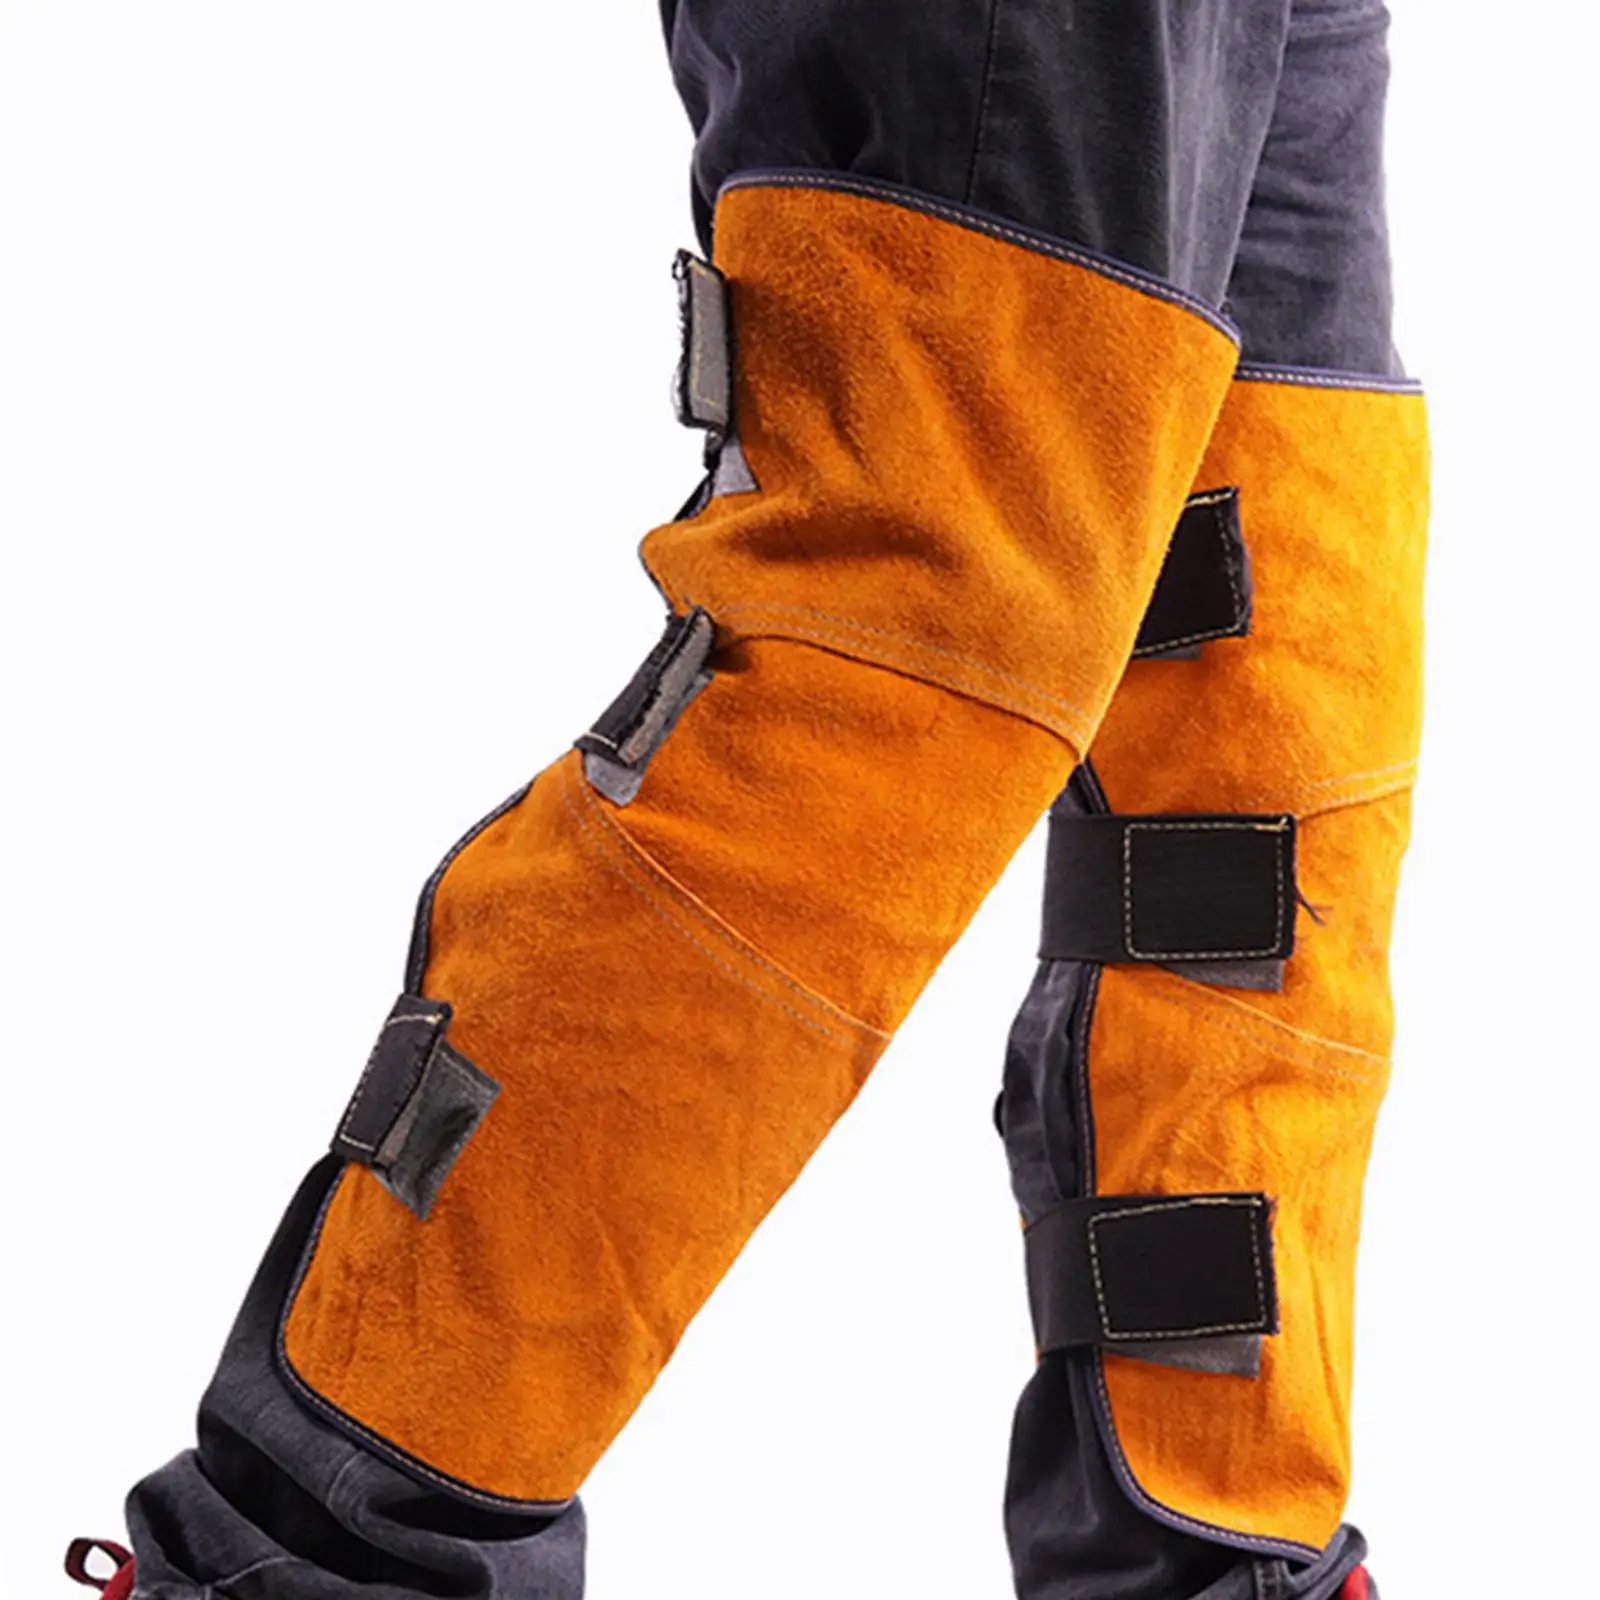 Welding Leg Covers Women Men Reinforced Heat Resistant Abrasion Resistant Thicken Knee Pads Protective Case Knee Protector